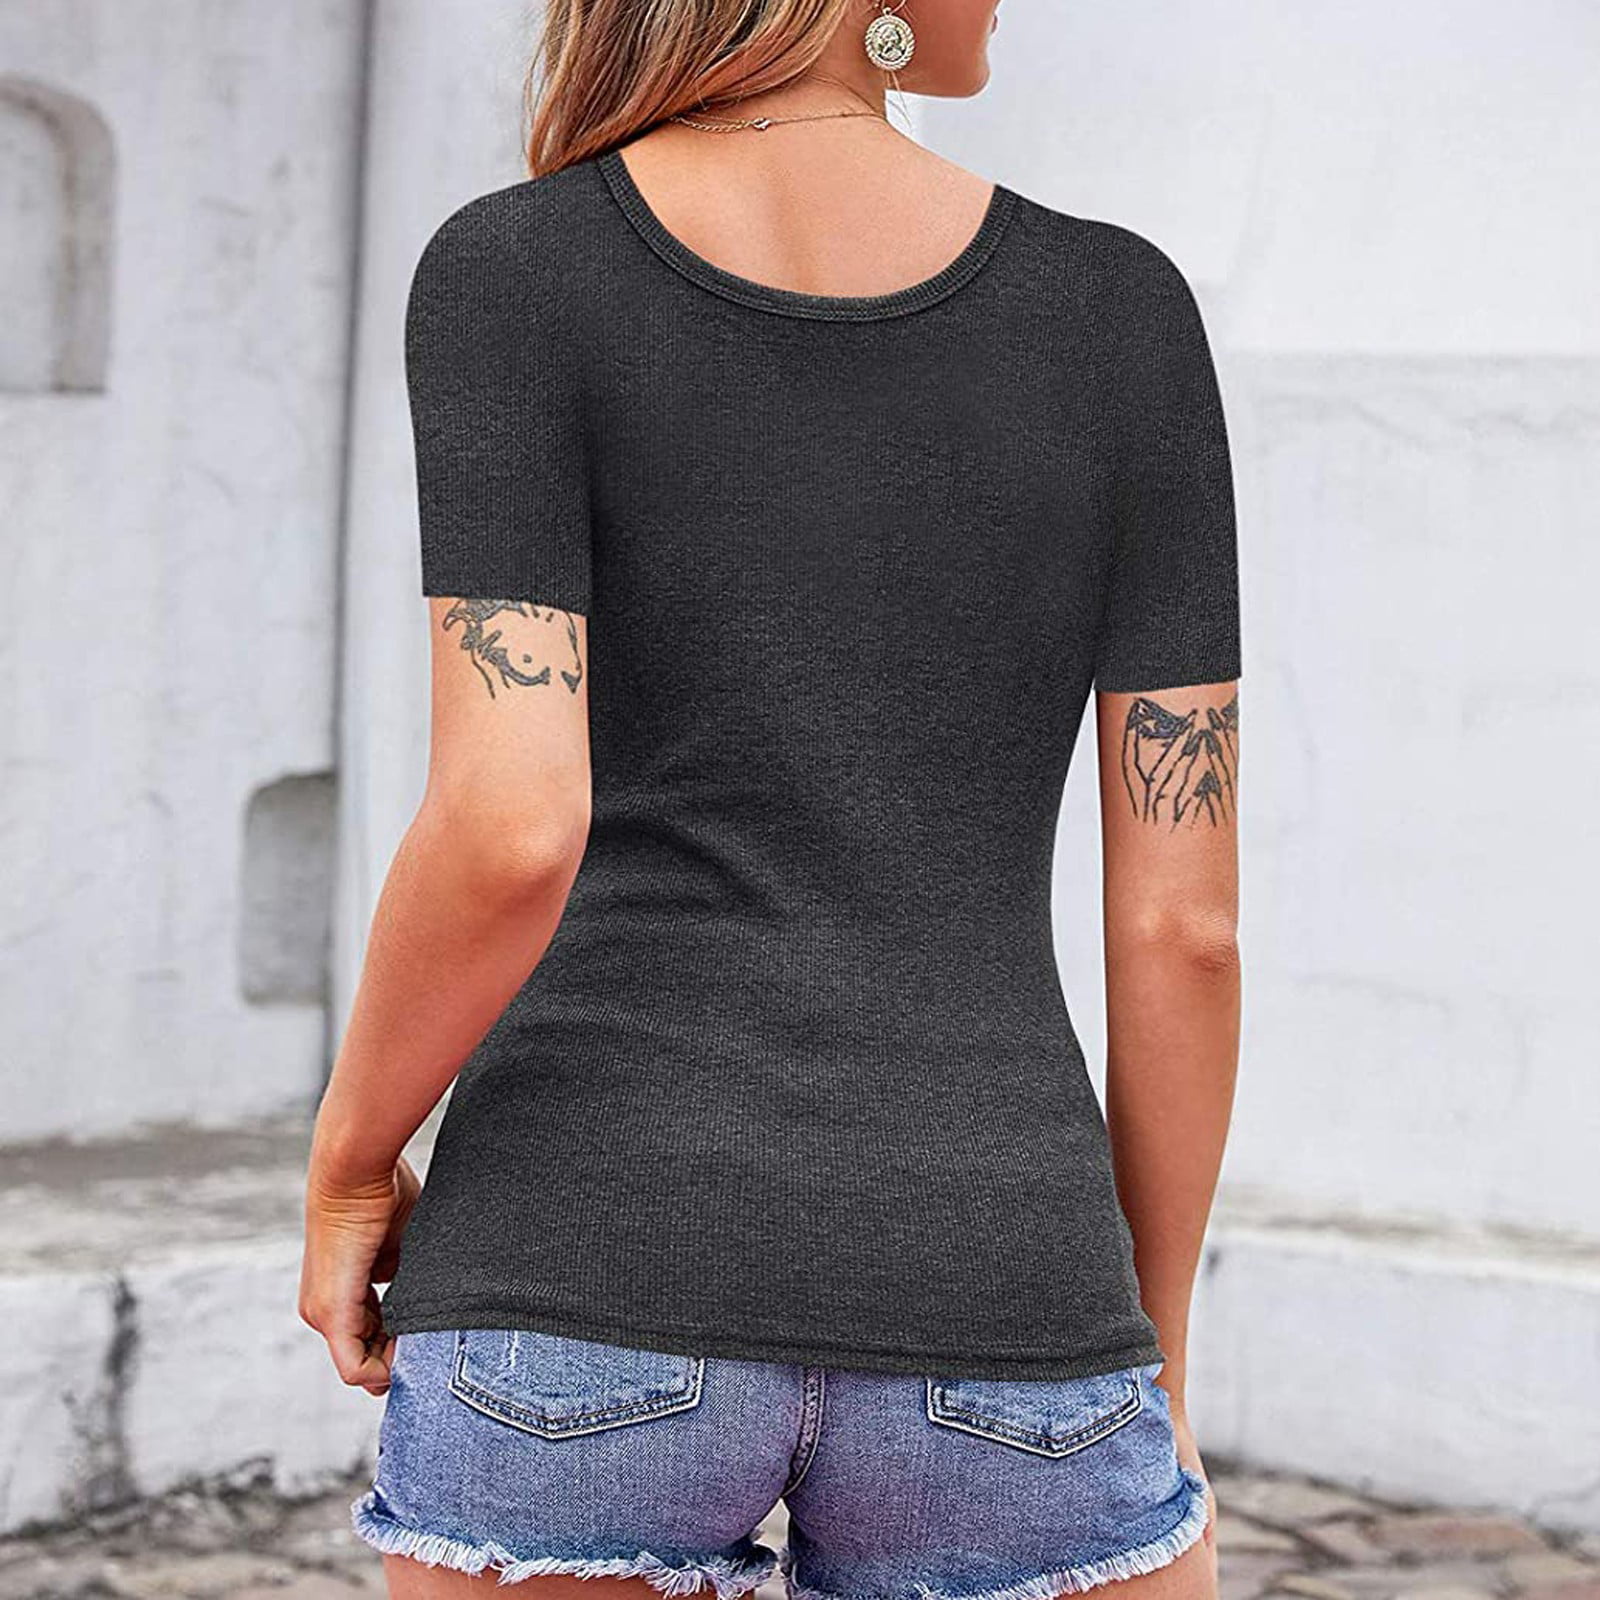 Womens Basic Sexy Low Cut Button Down Tight Slim Fitted Tee Tops T